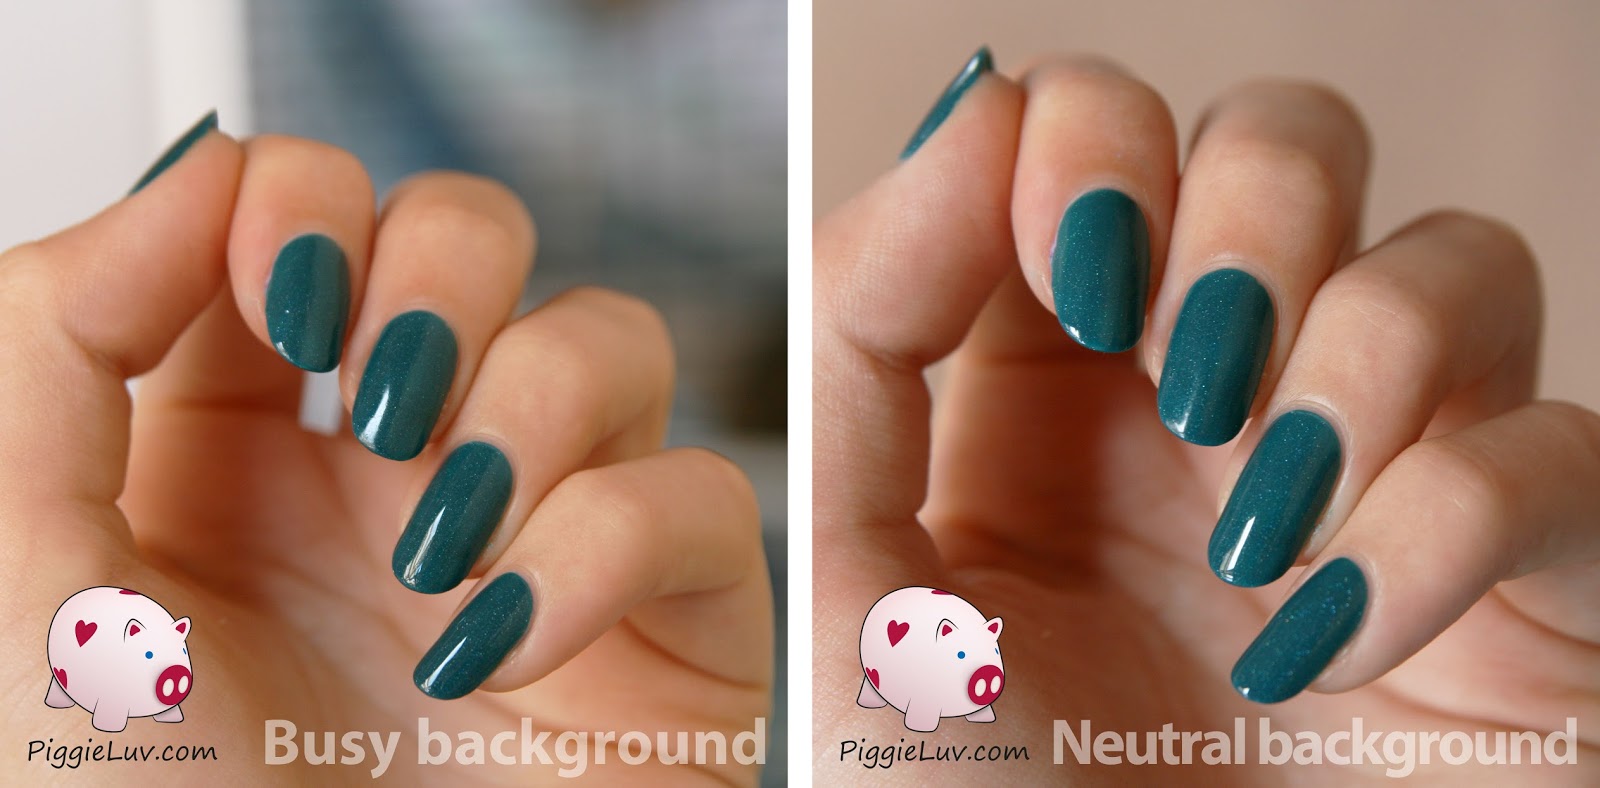 PiggieLuv: 10 ways to make your nail photos look even better!